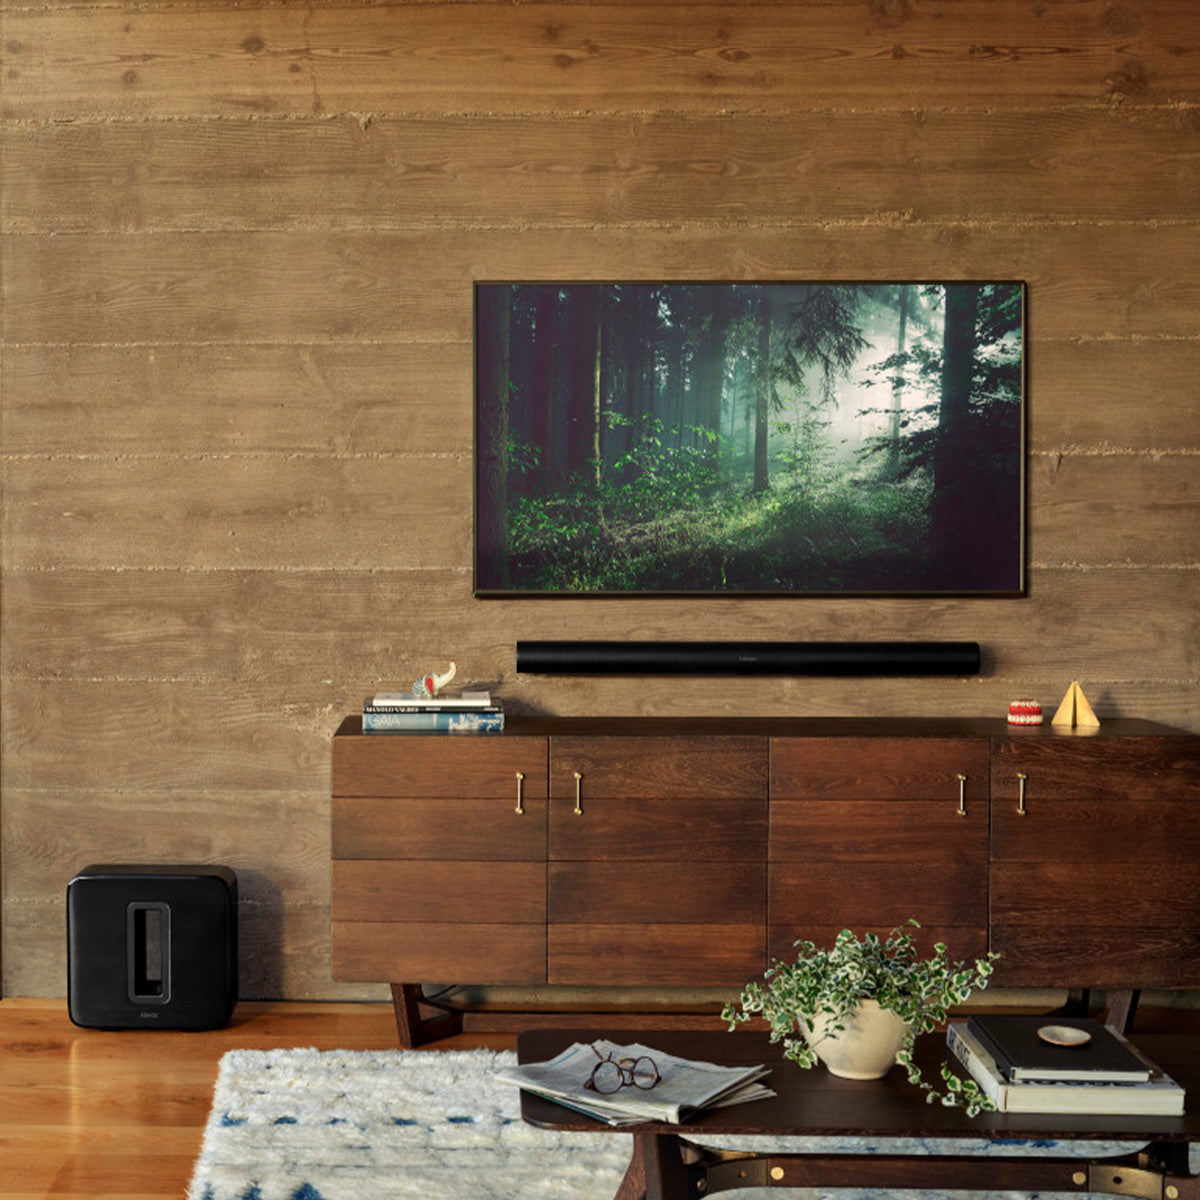 Sonos Arc Review: Dolby Atmos In The Soundbar We've Been Waiting